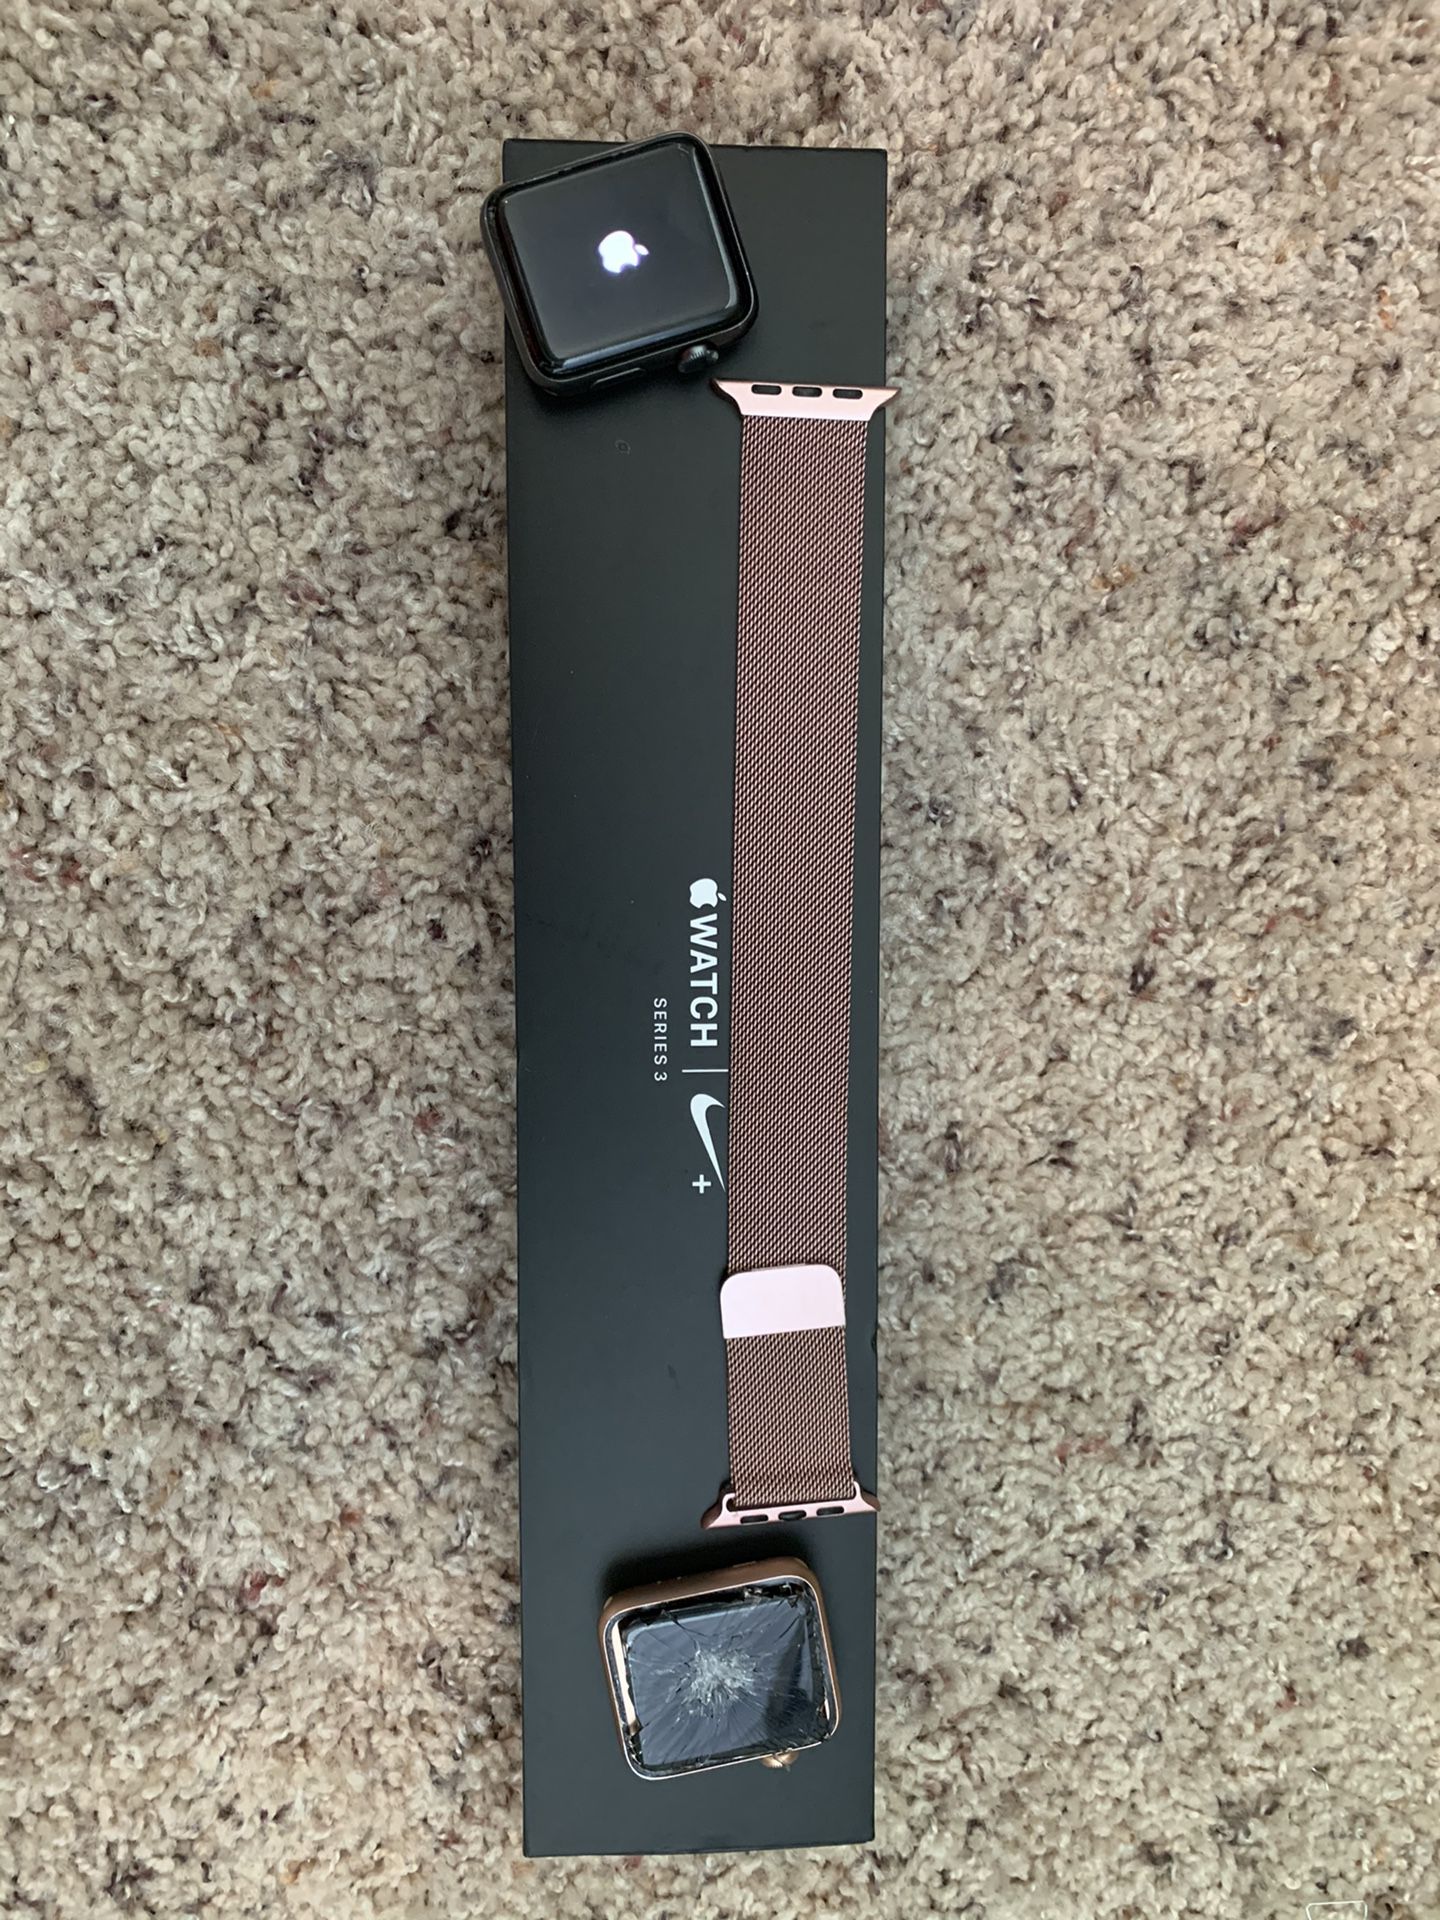 Two Apple Watches Series 3 (42mm)